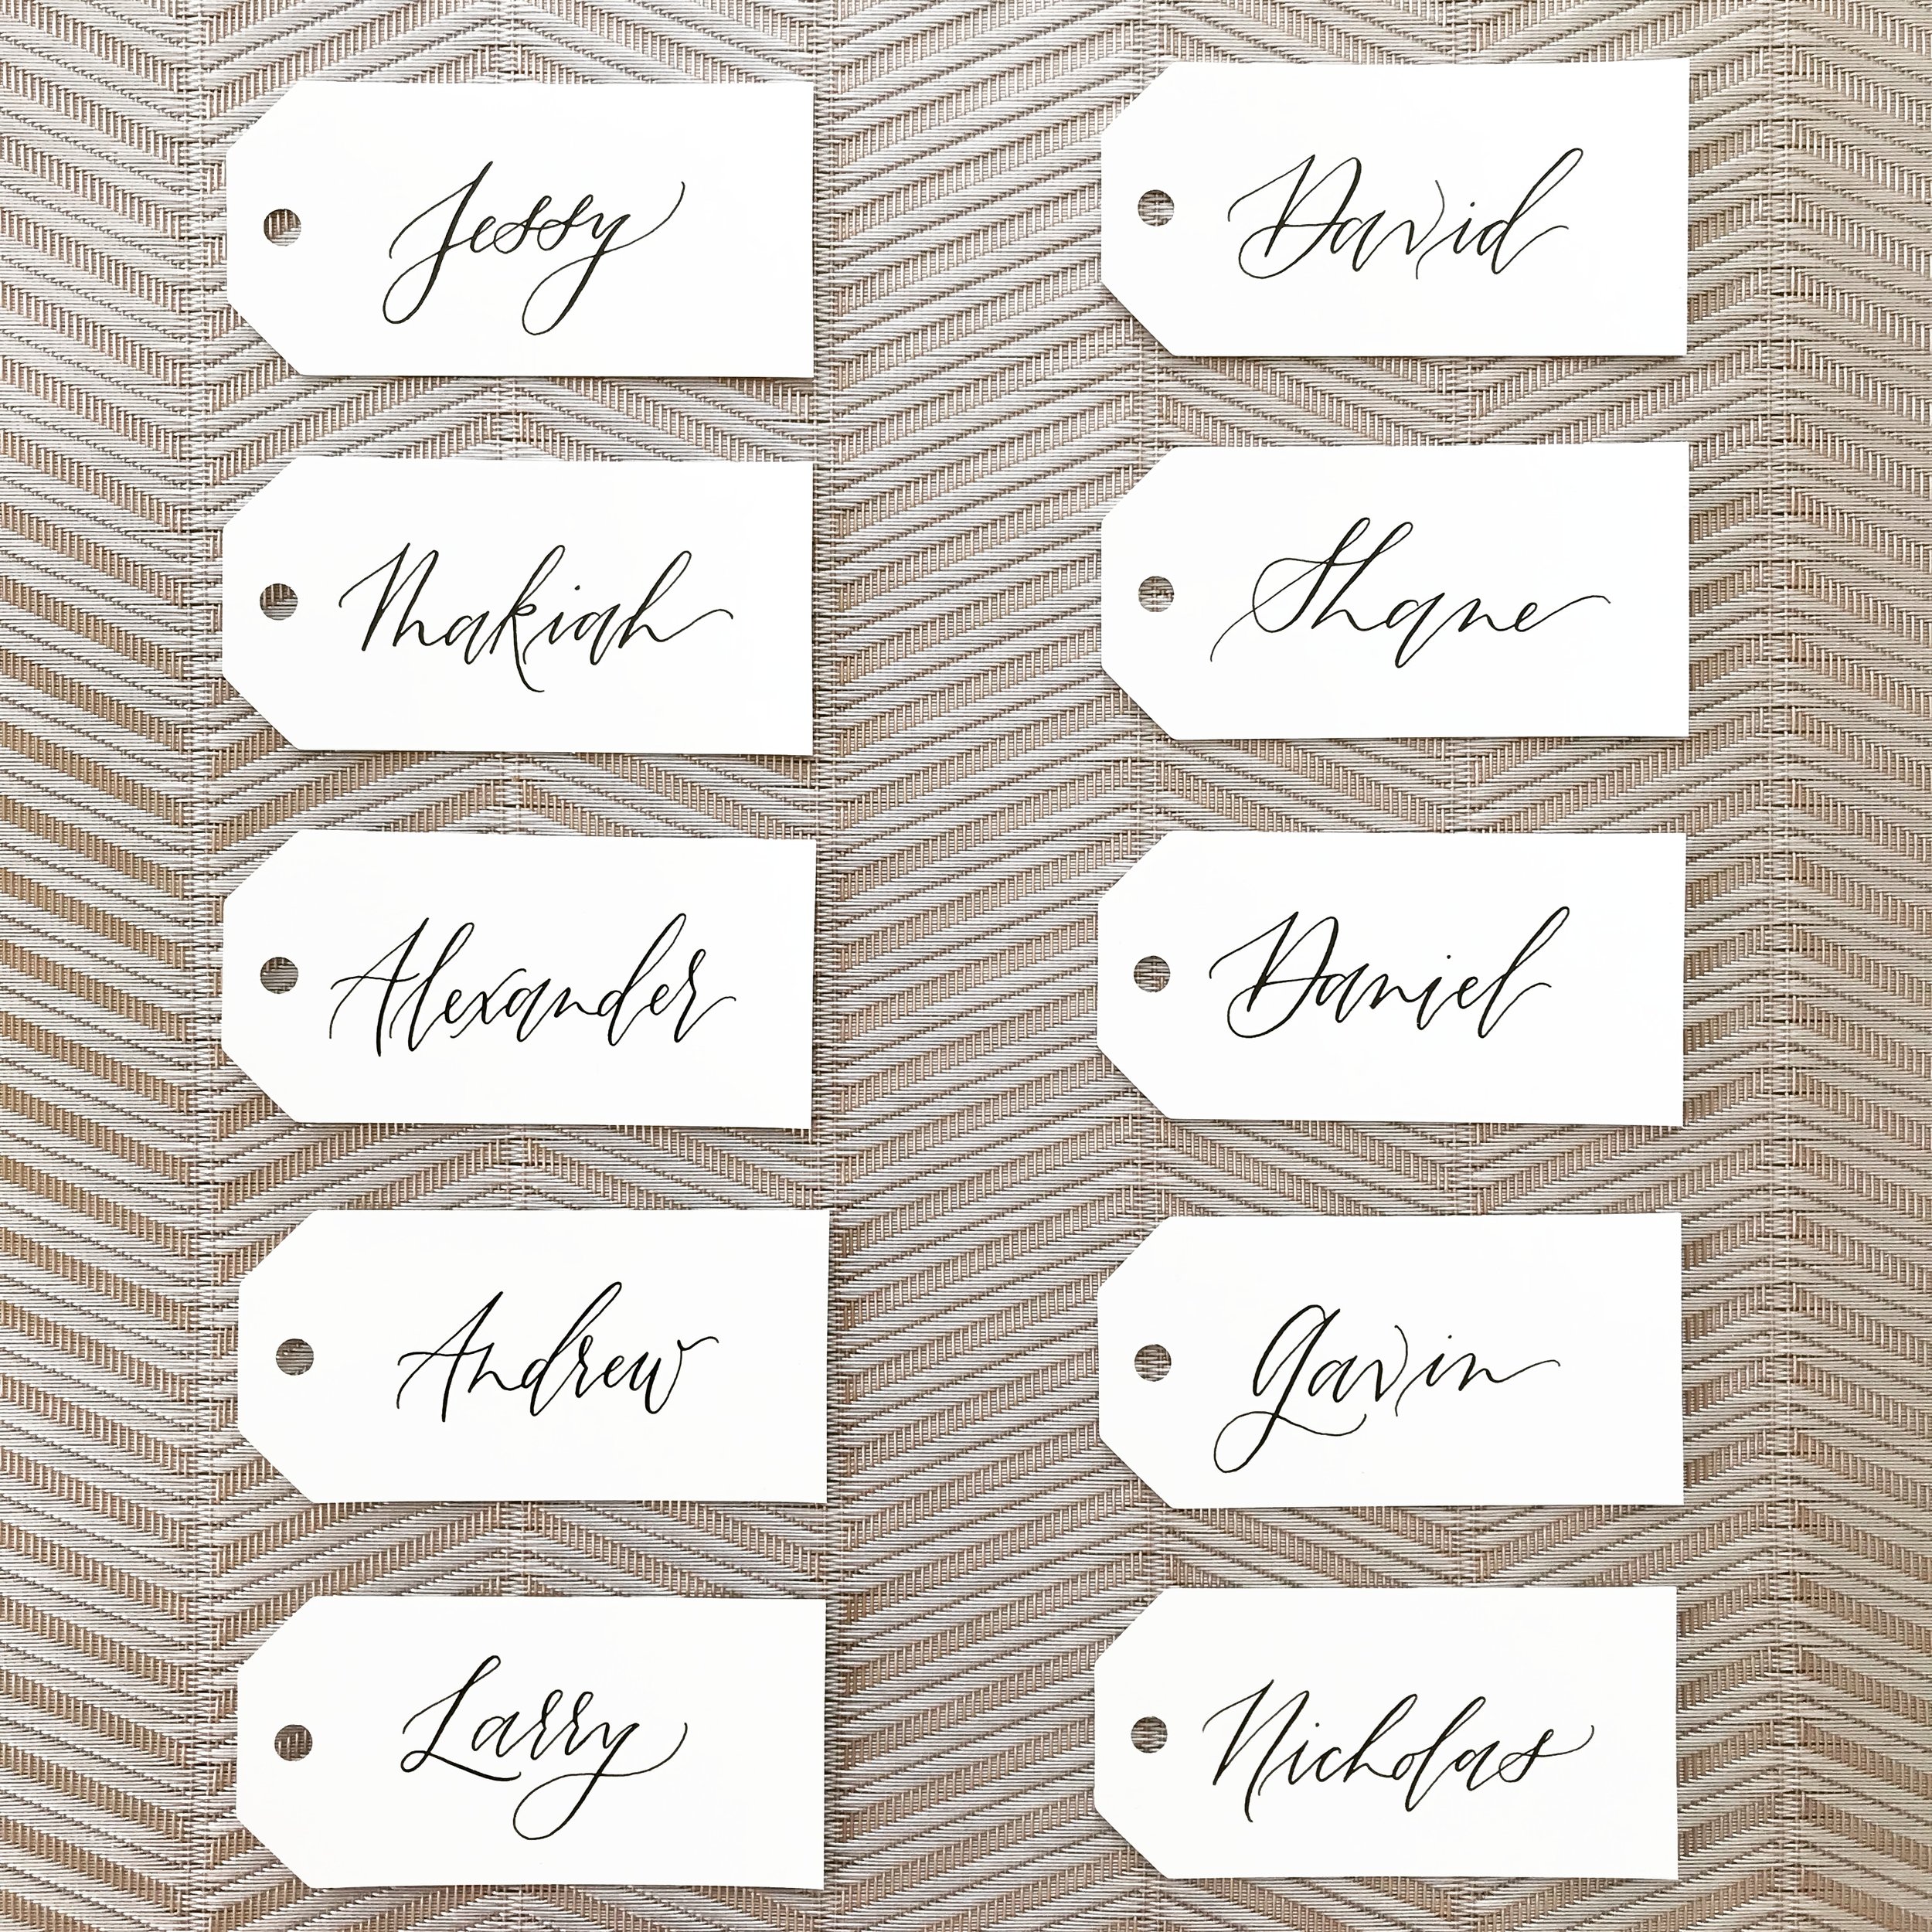 Wedding Place Cards of white tags with black ink calligraphy